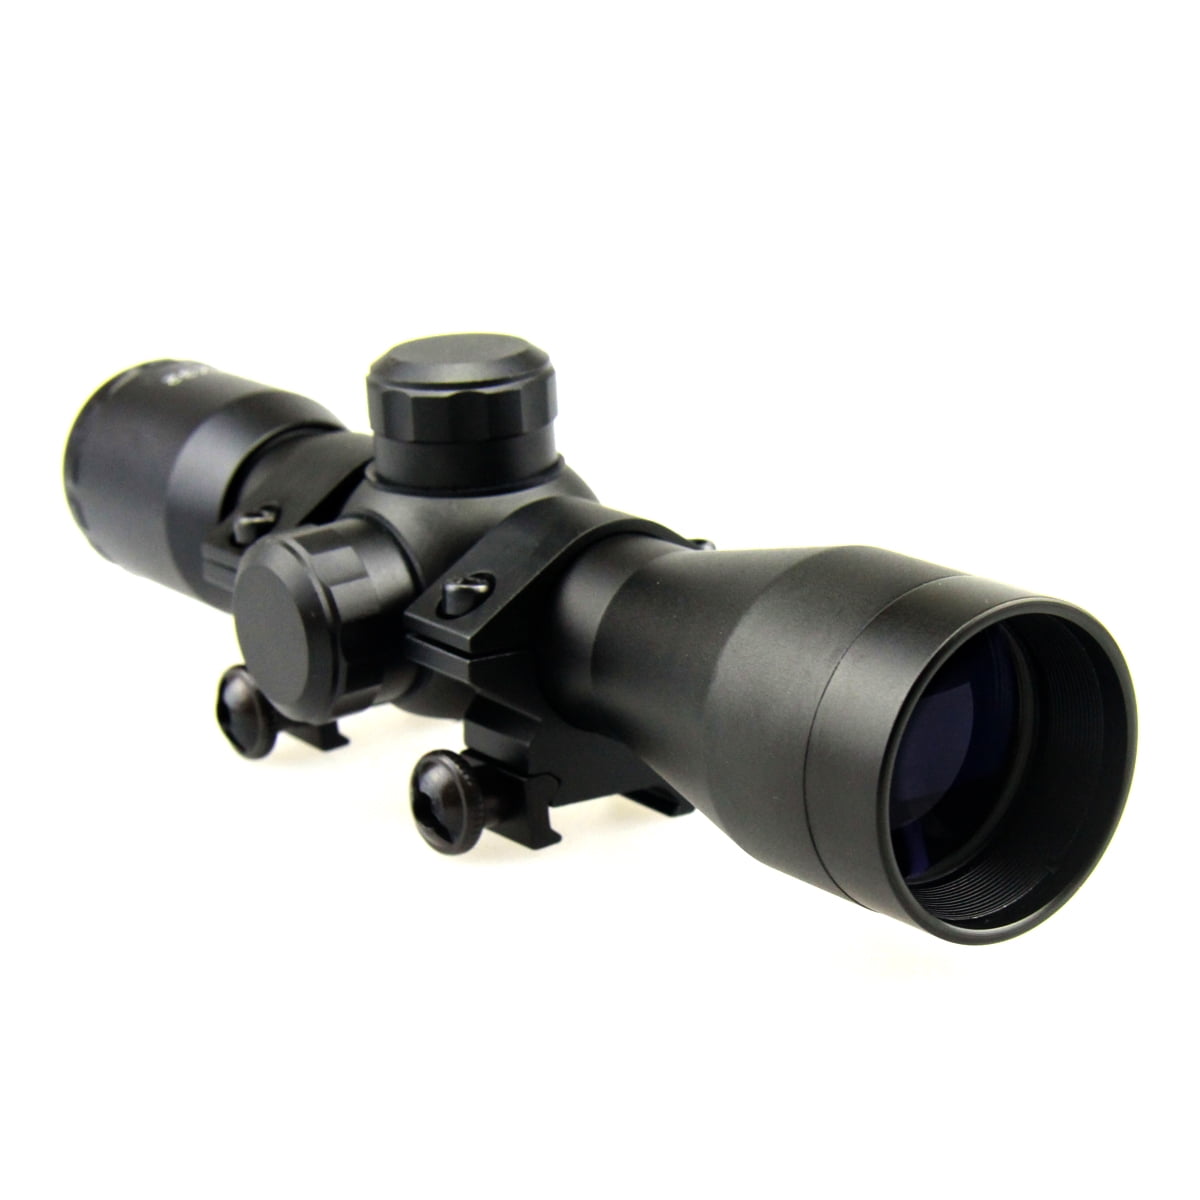 HOT Tactical 4 x 32 Compact Sight Scope With 20mm Rail Mount For Air US WI 